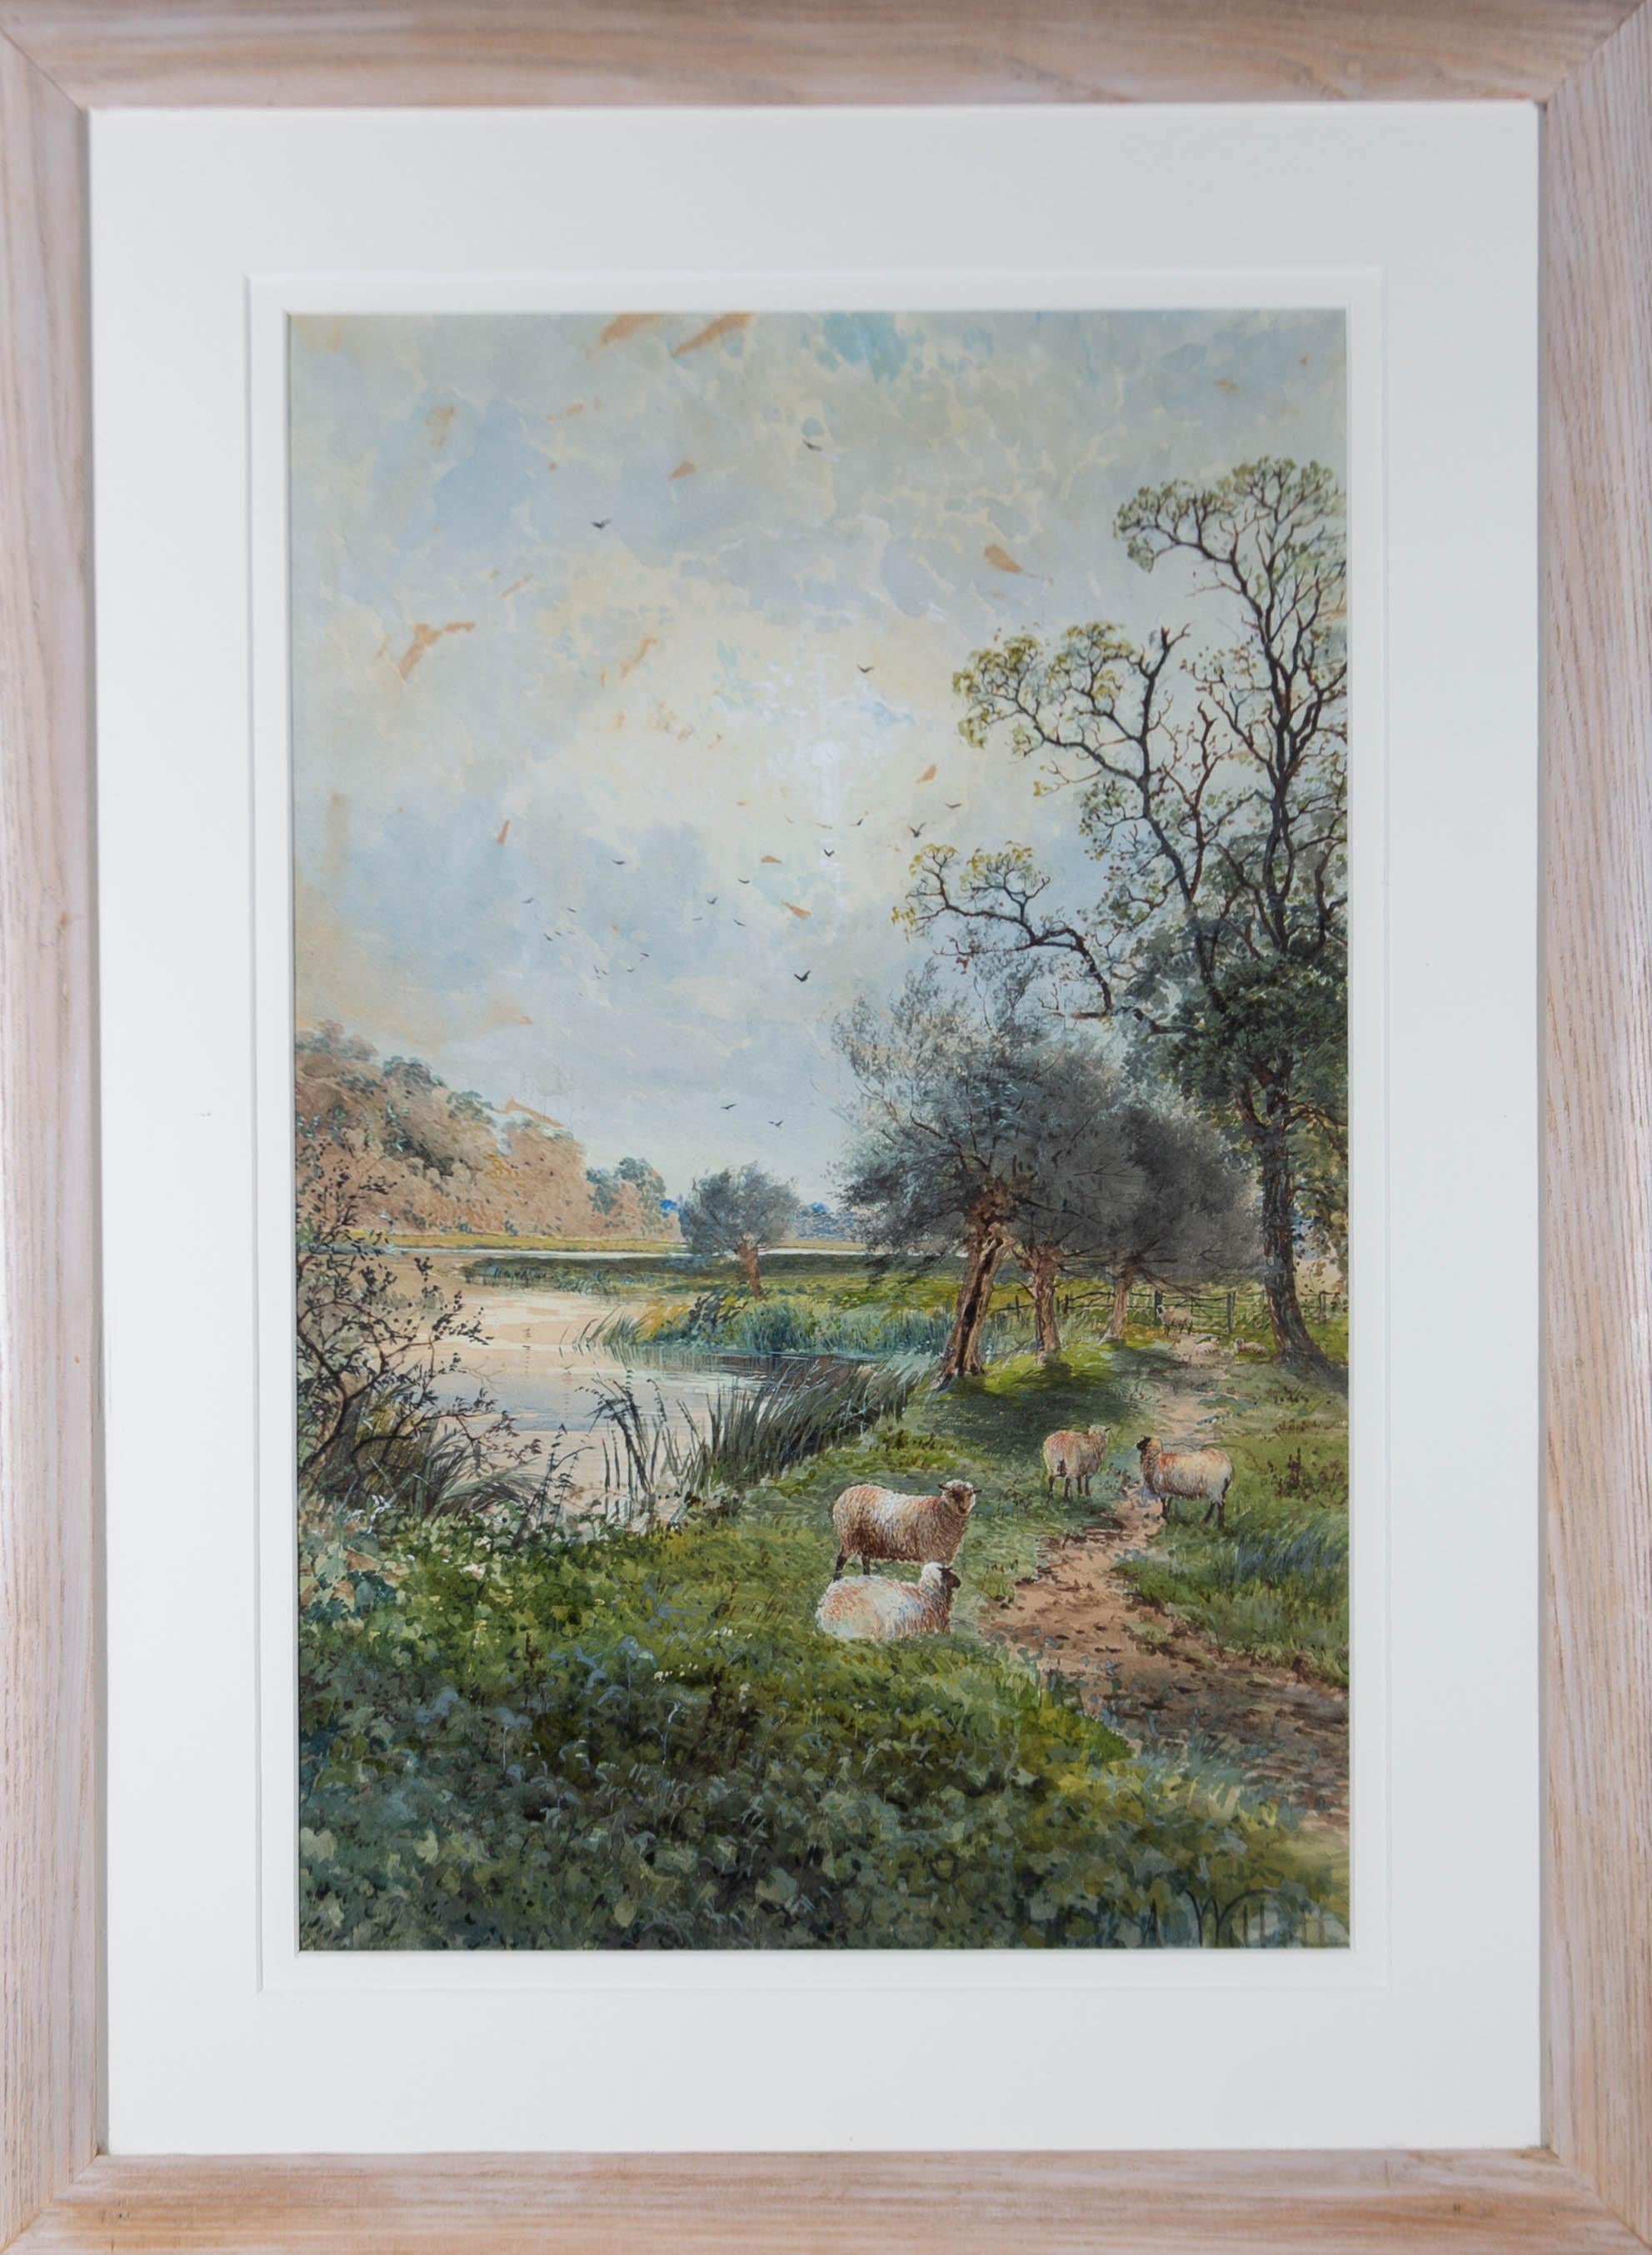 A beautiful Summer landscape in watercolour showing a group of sheep, resting in the cool shadows of a verdant, riverside path on the backwaters of the Thames. The blue sky overhead is filled with birds and the clouds reflect in the glittering